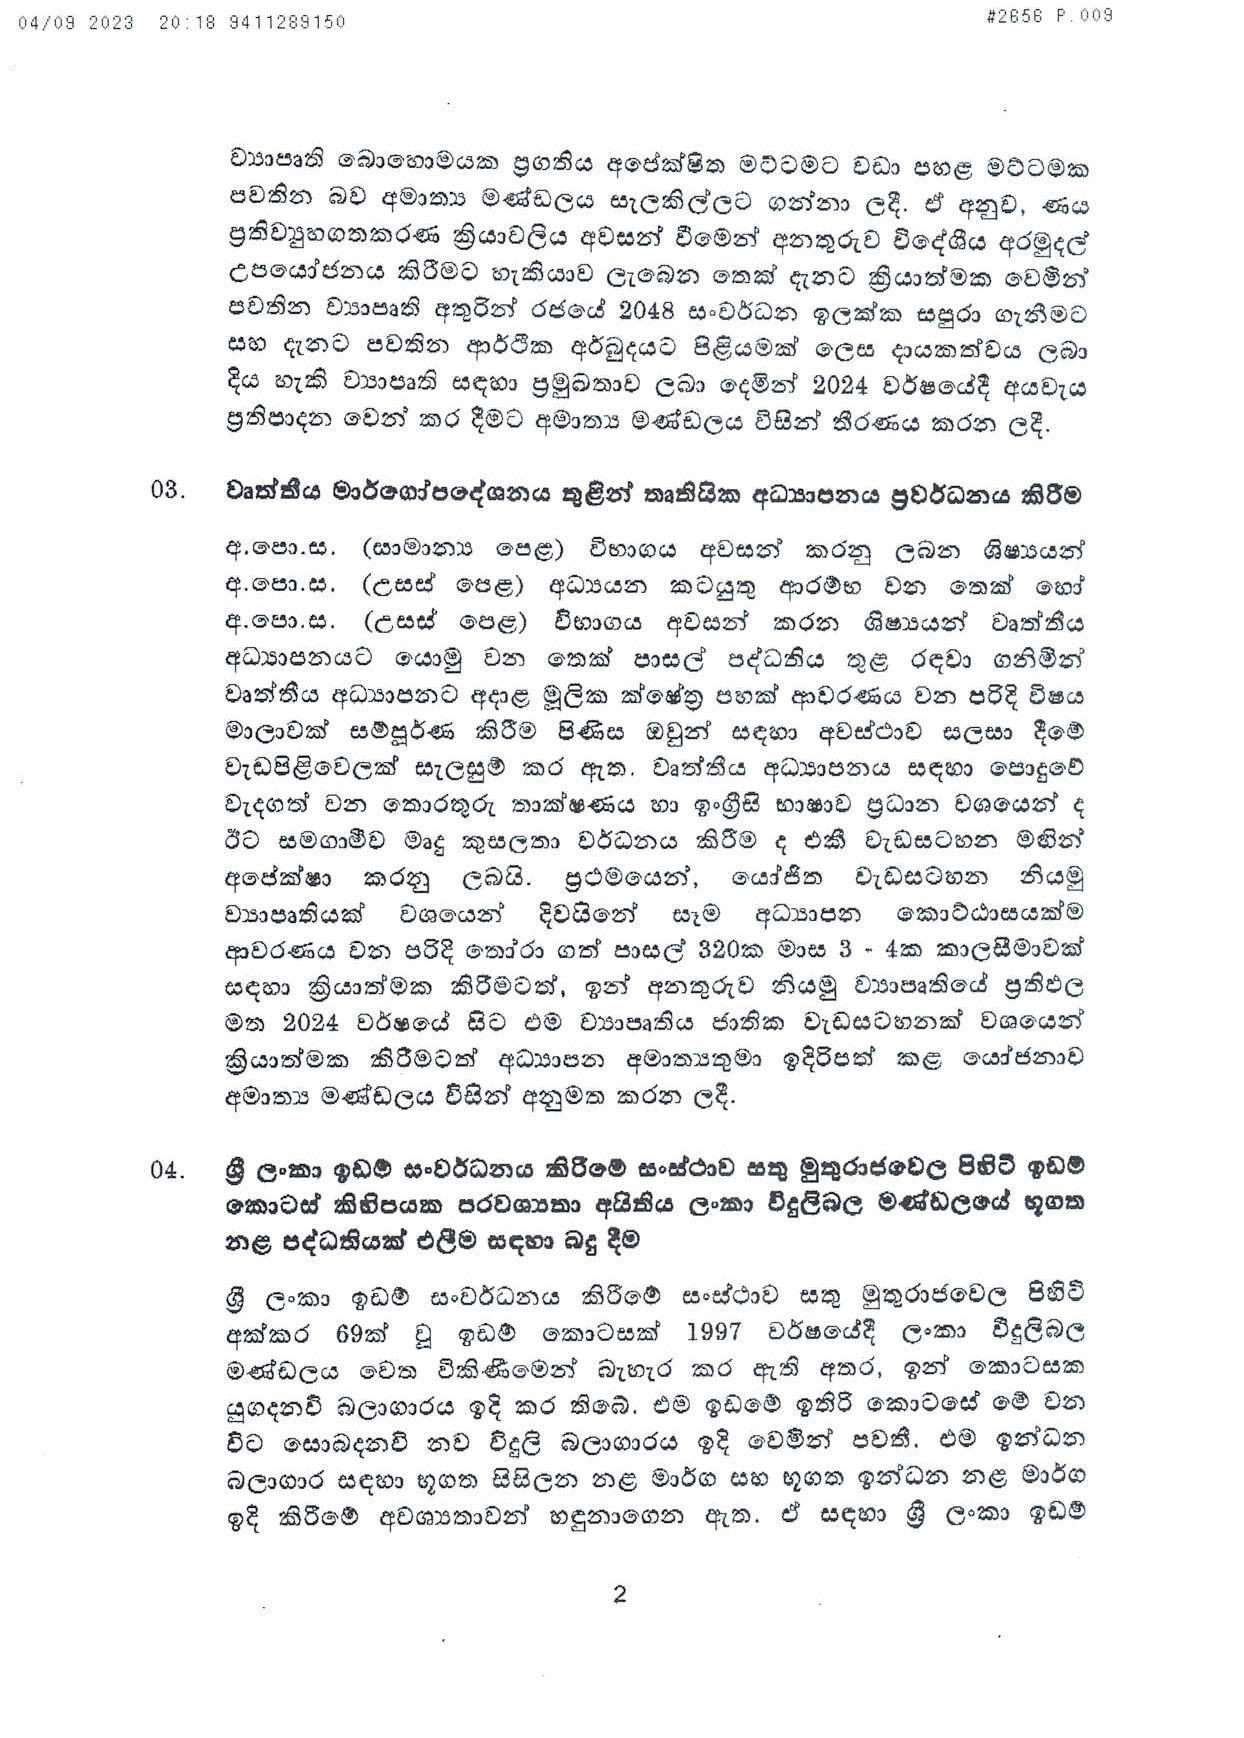 Cabinet Decision on 04.09.2023 page 002